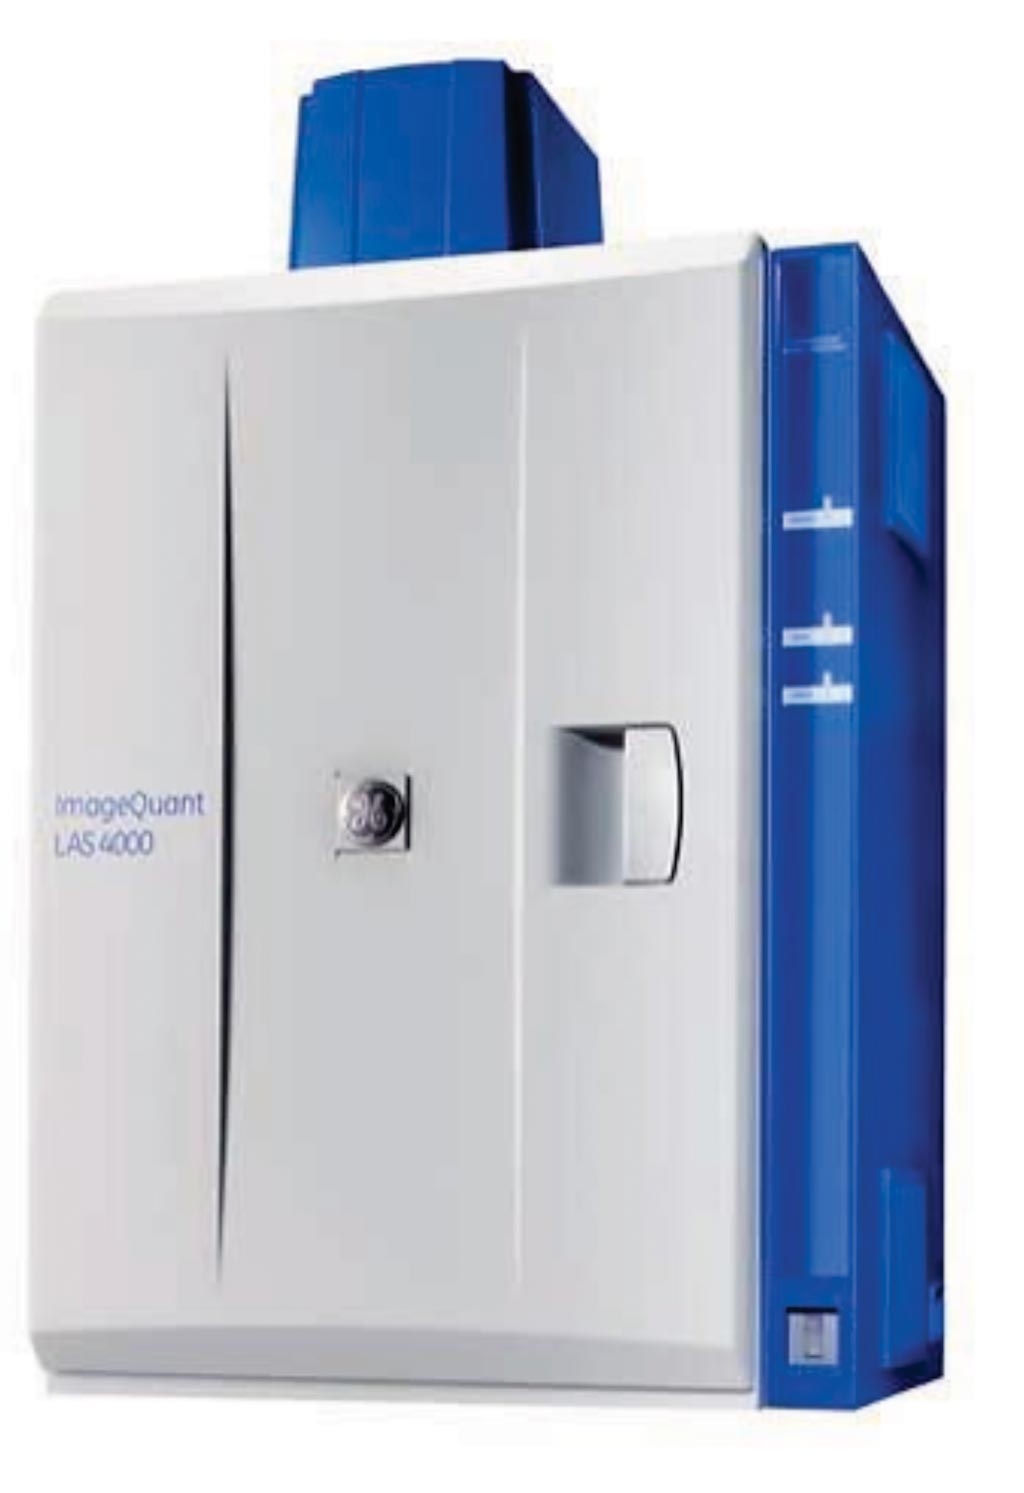 Image: The ImageQuant LAS 4000 biomolecular imager (Photo courtesy of GE Healthcare).